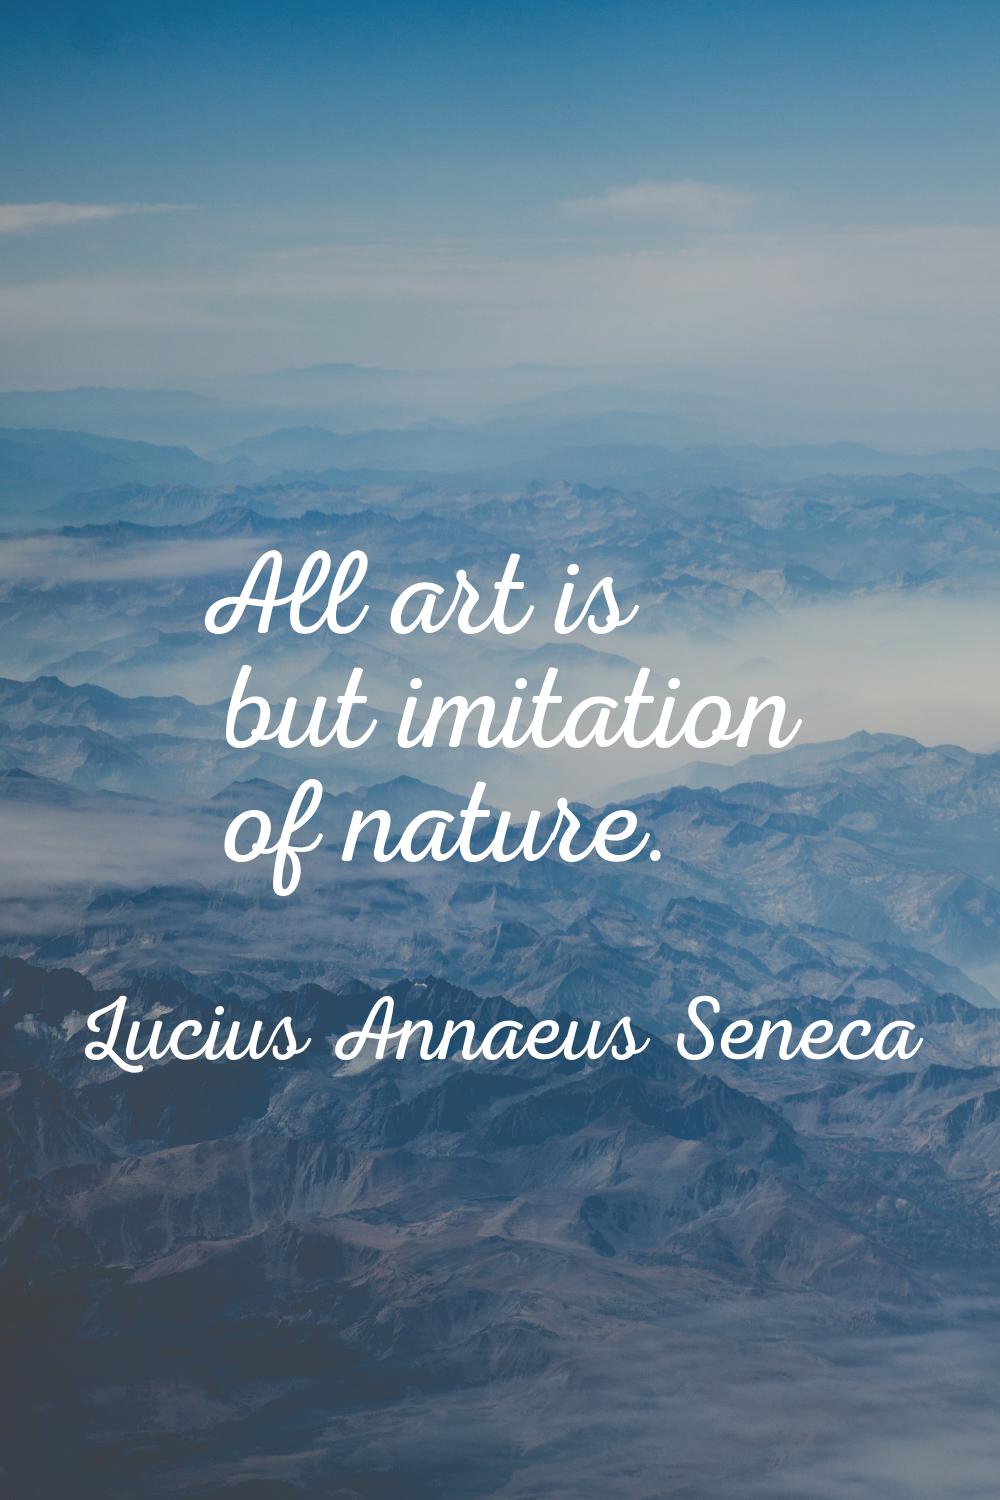 All art is but imitation of nature.